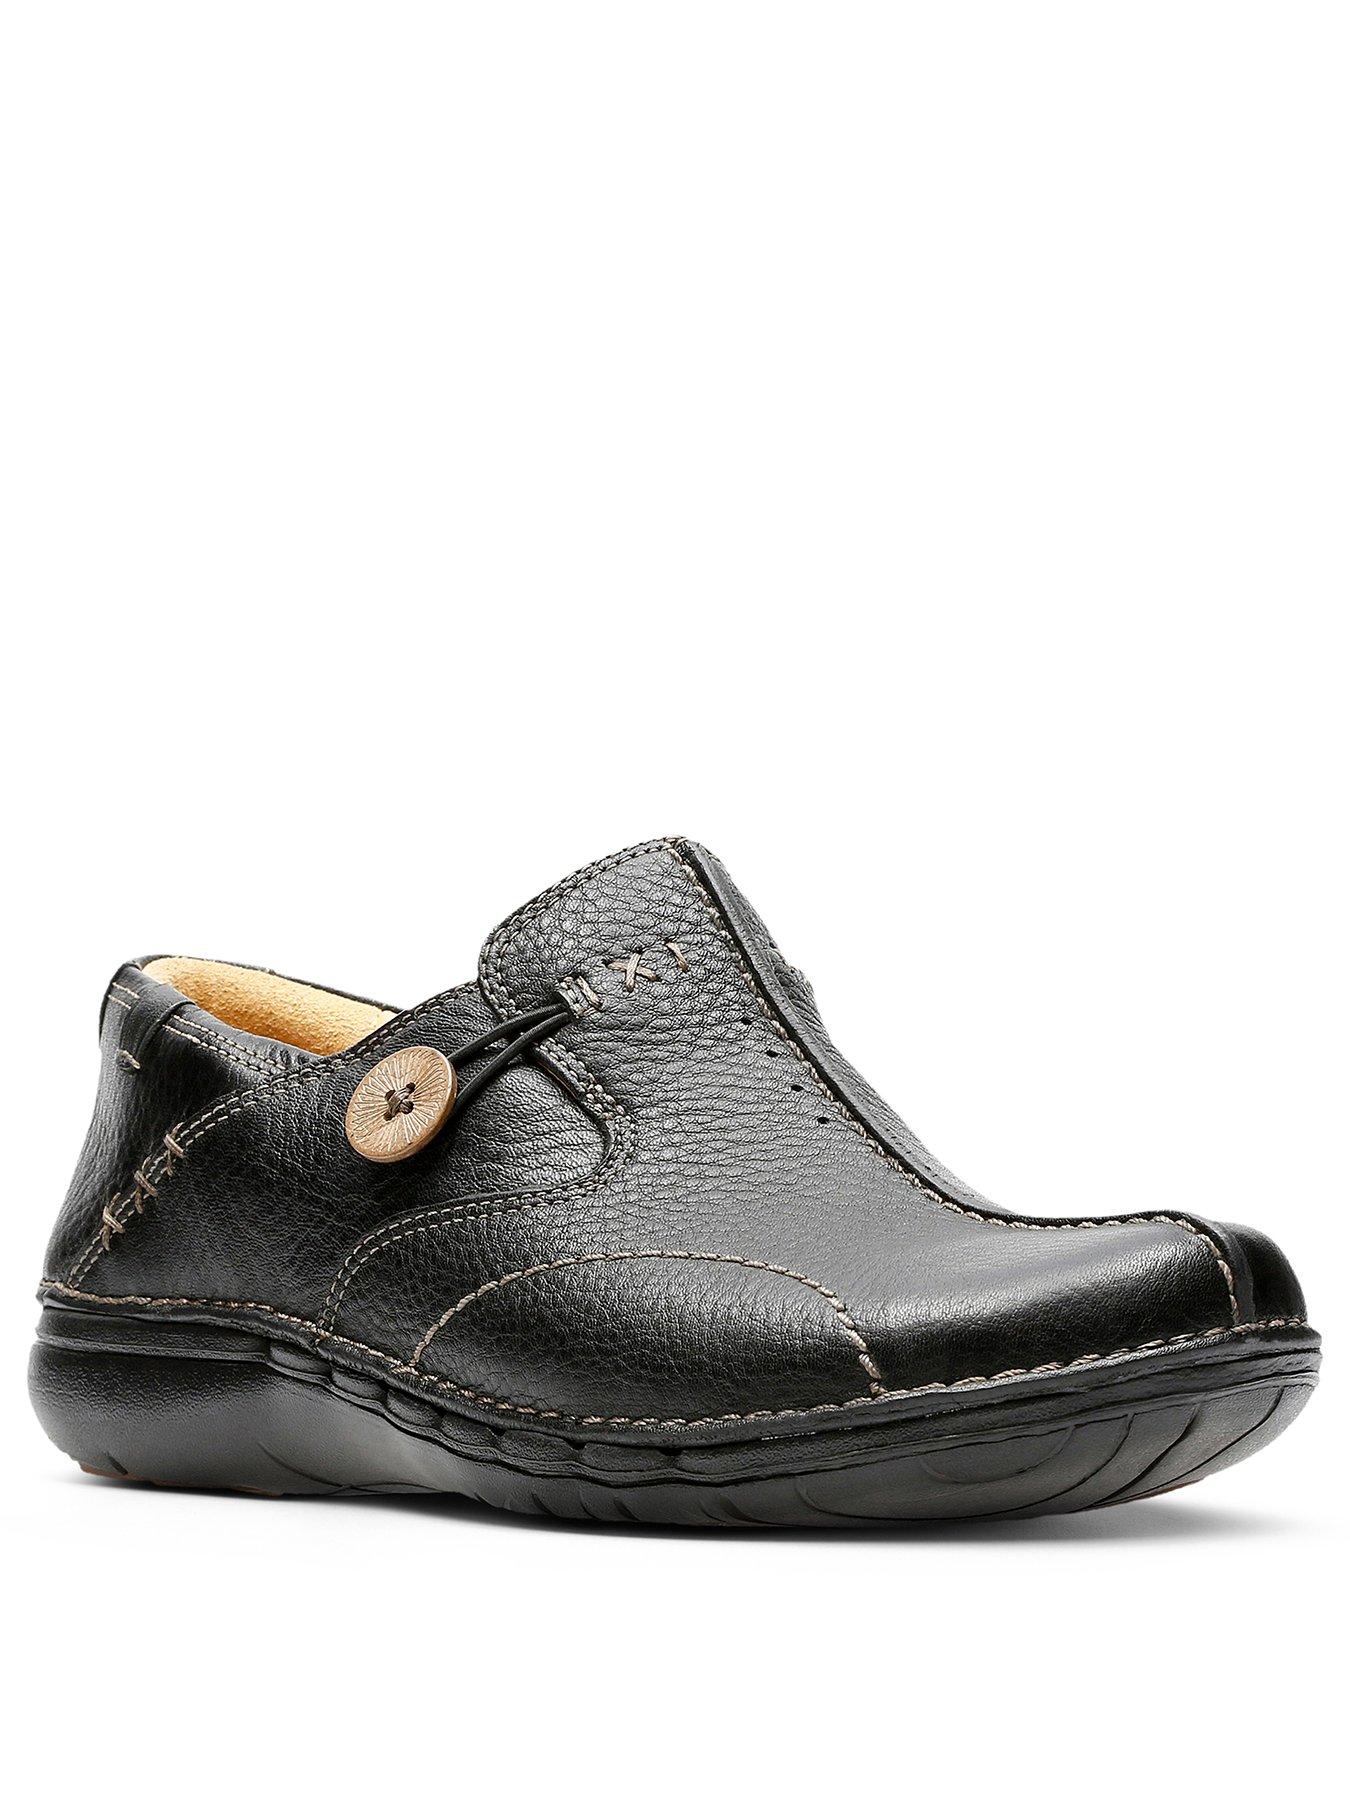 black friday deals on clarks shoes